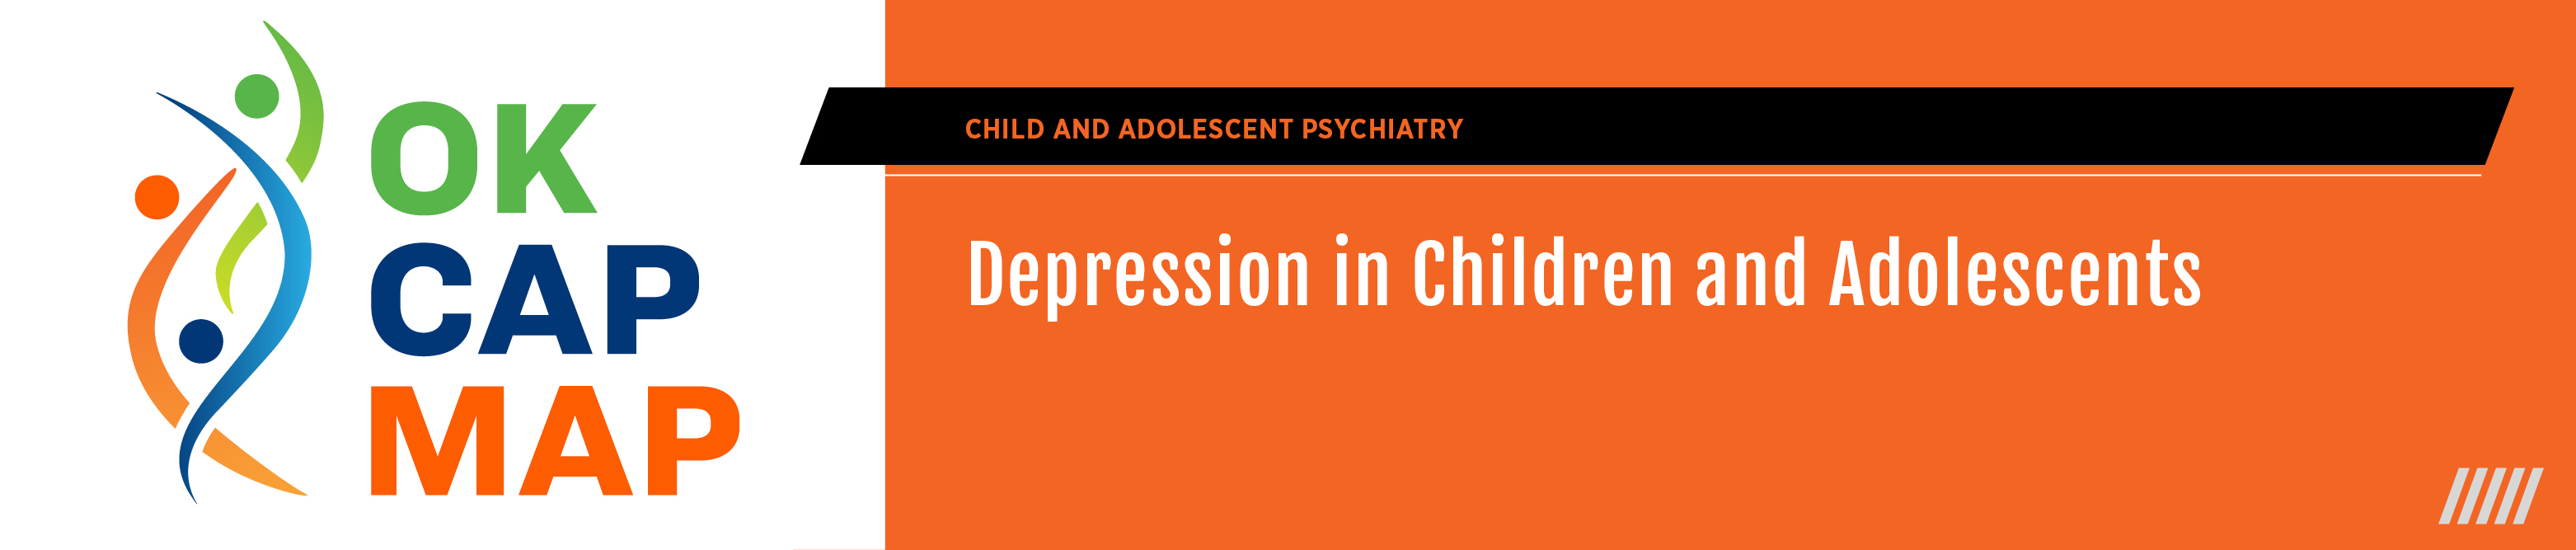 OKCAPMAP: Depression in Children and Adolescents Banner